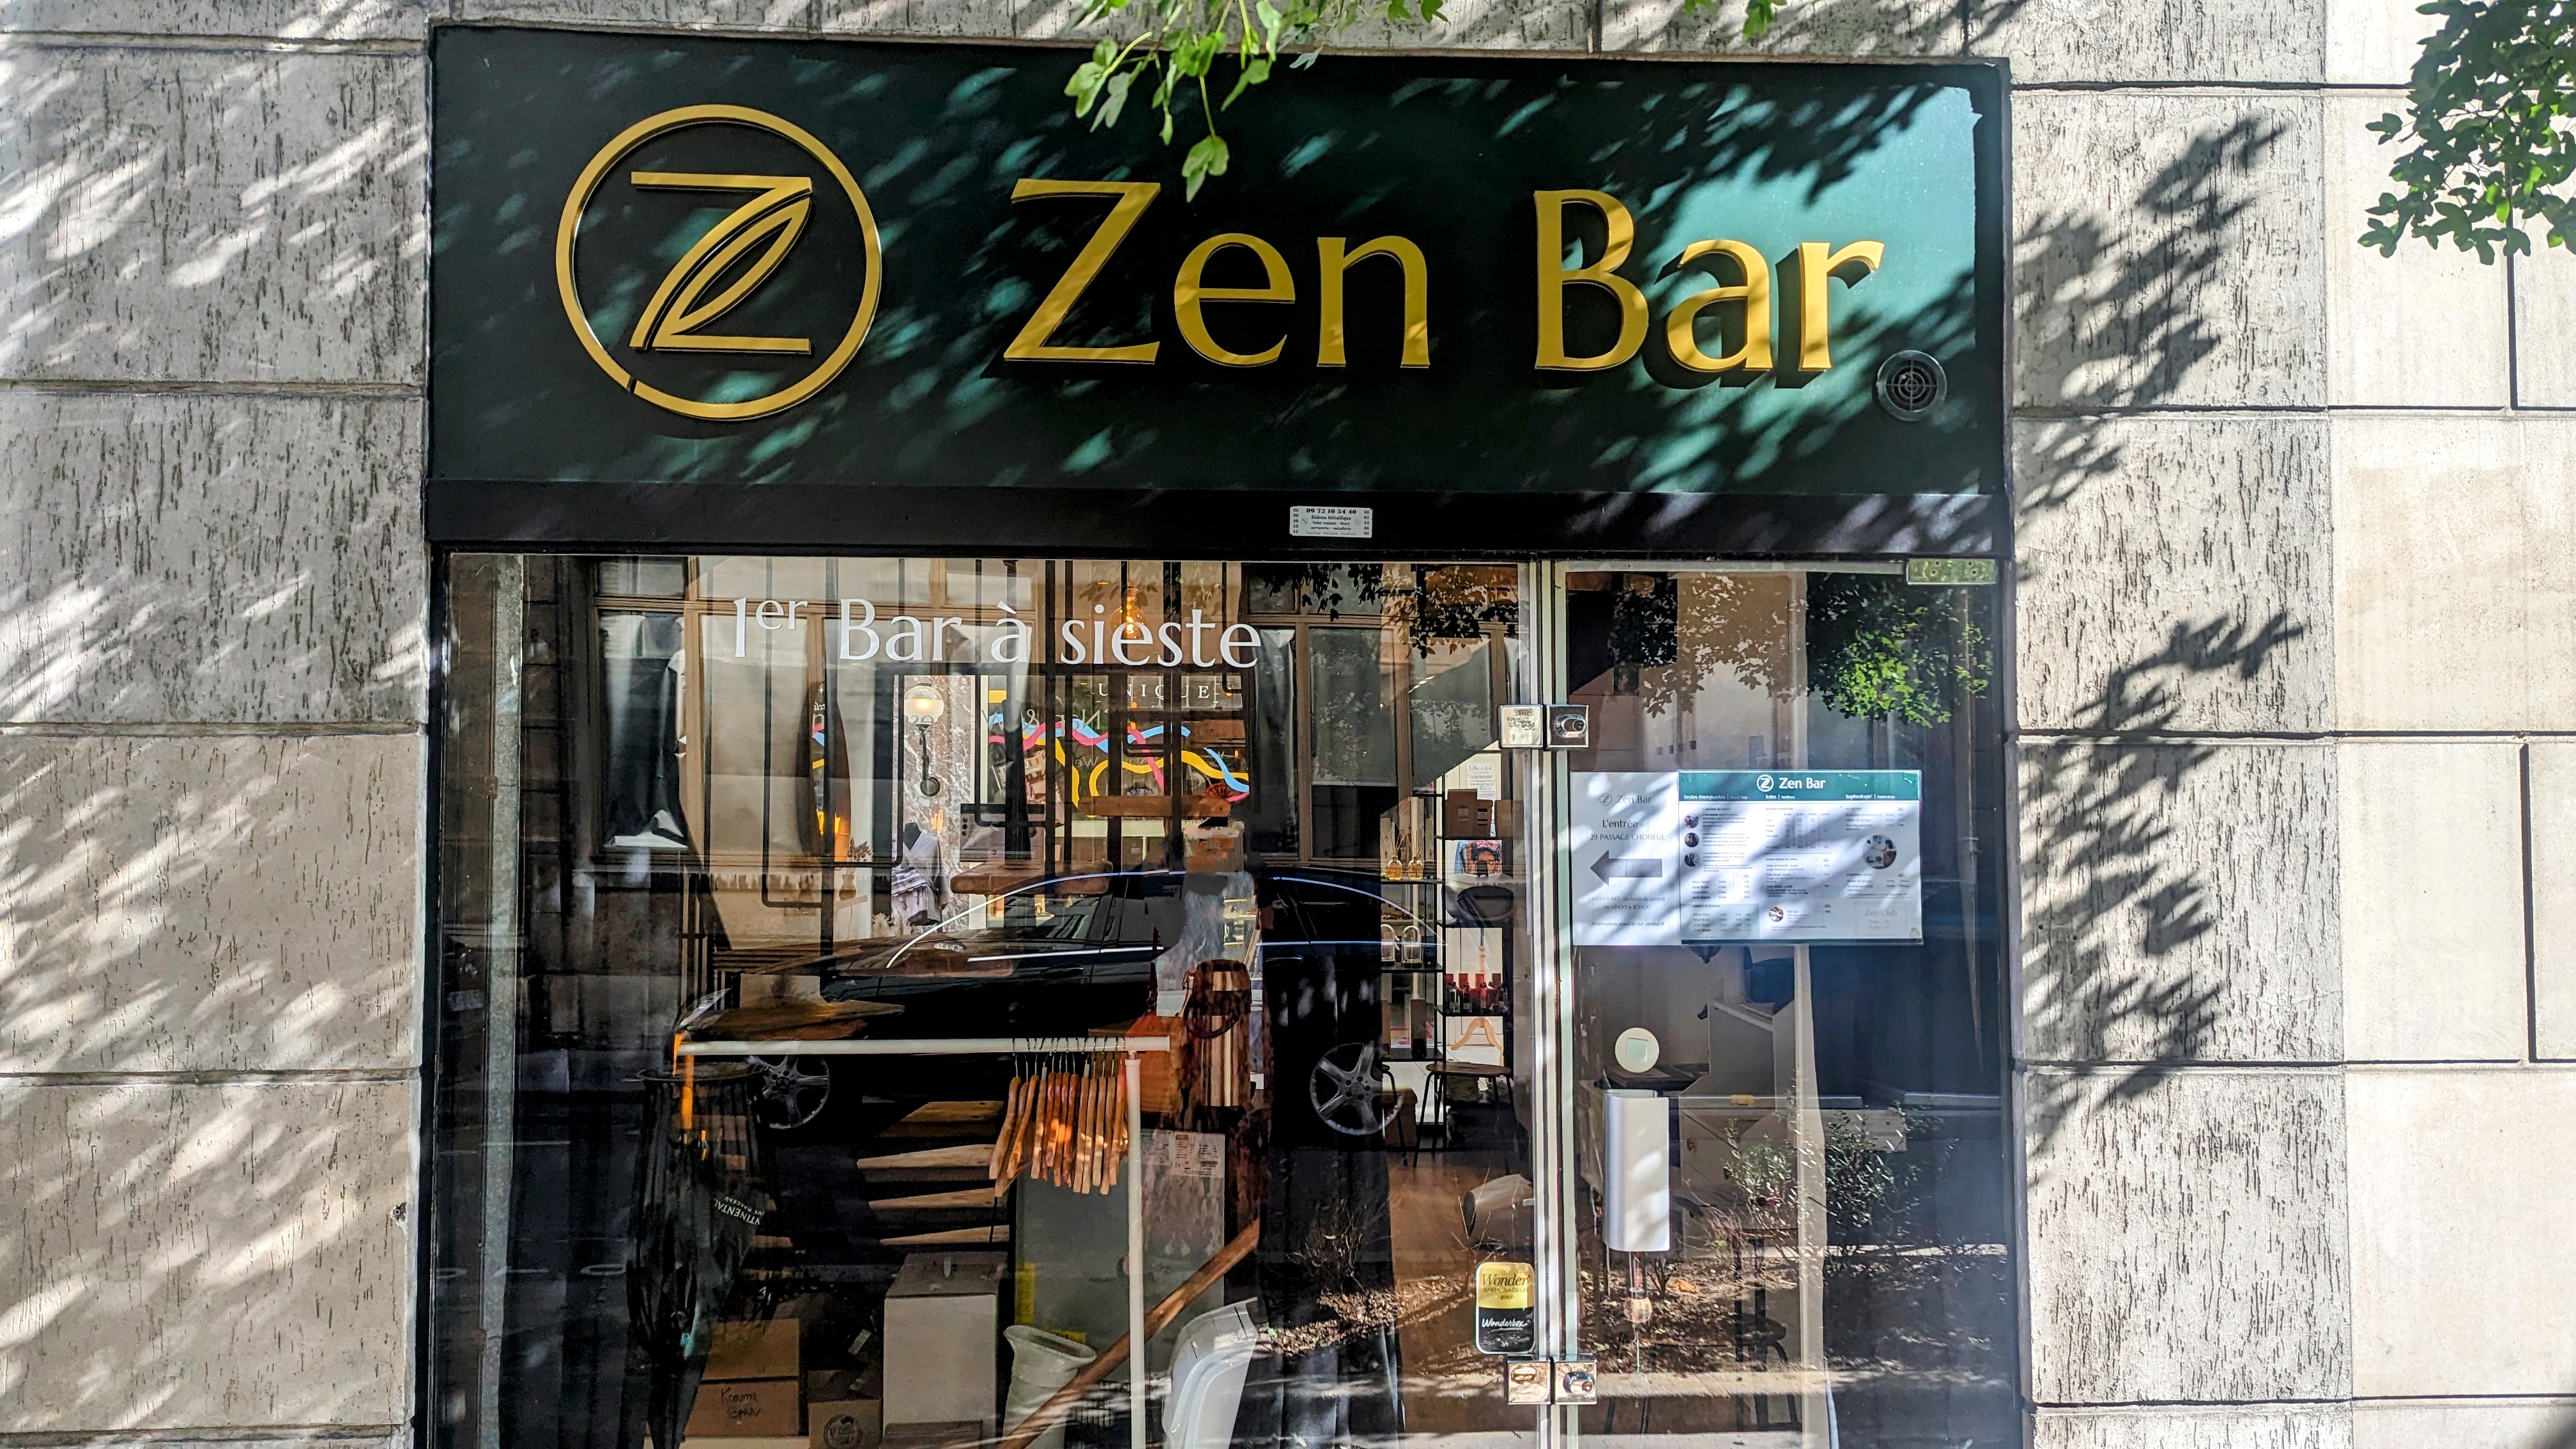 The dark green storefront of Zen Bar located in one of Paris' many covered passageways.